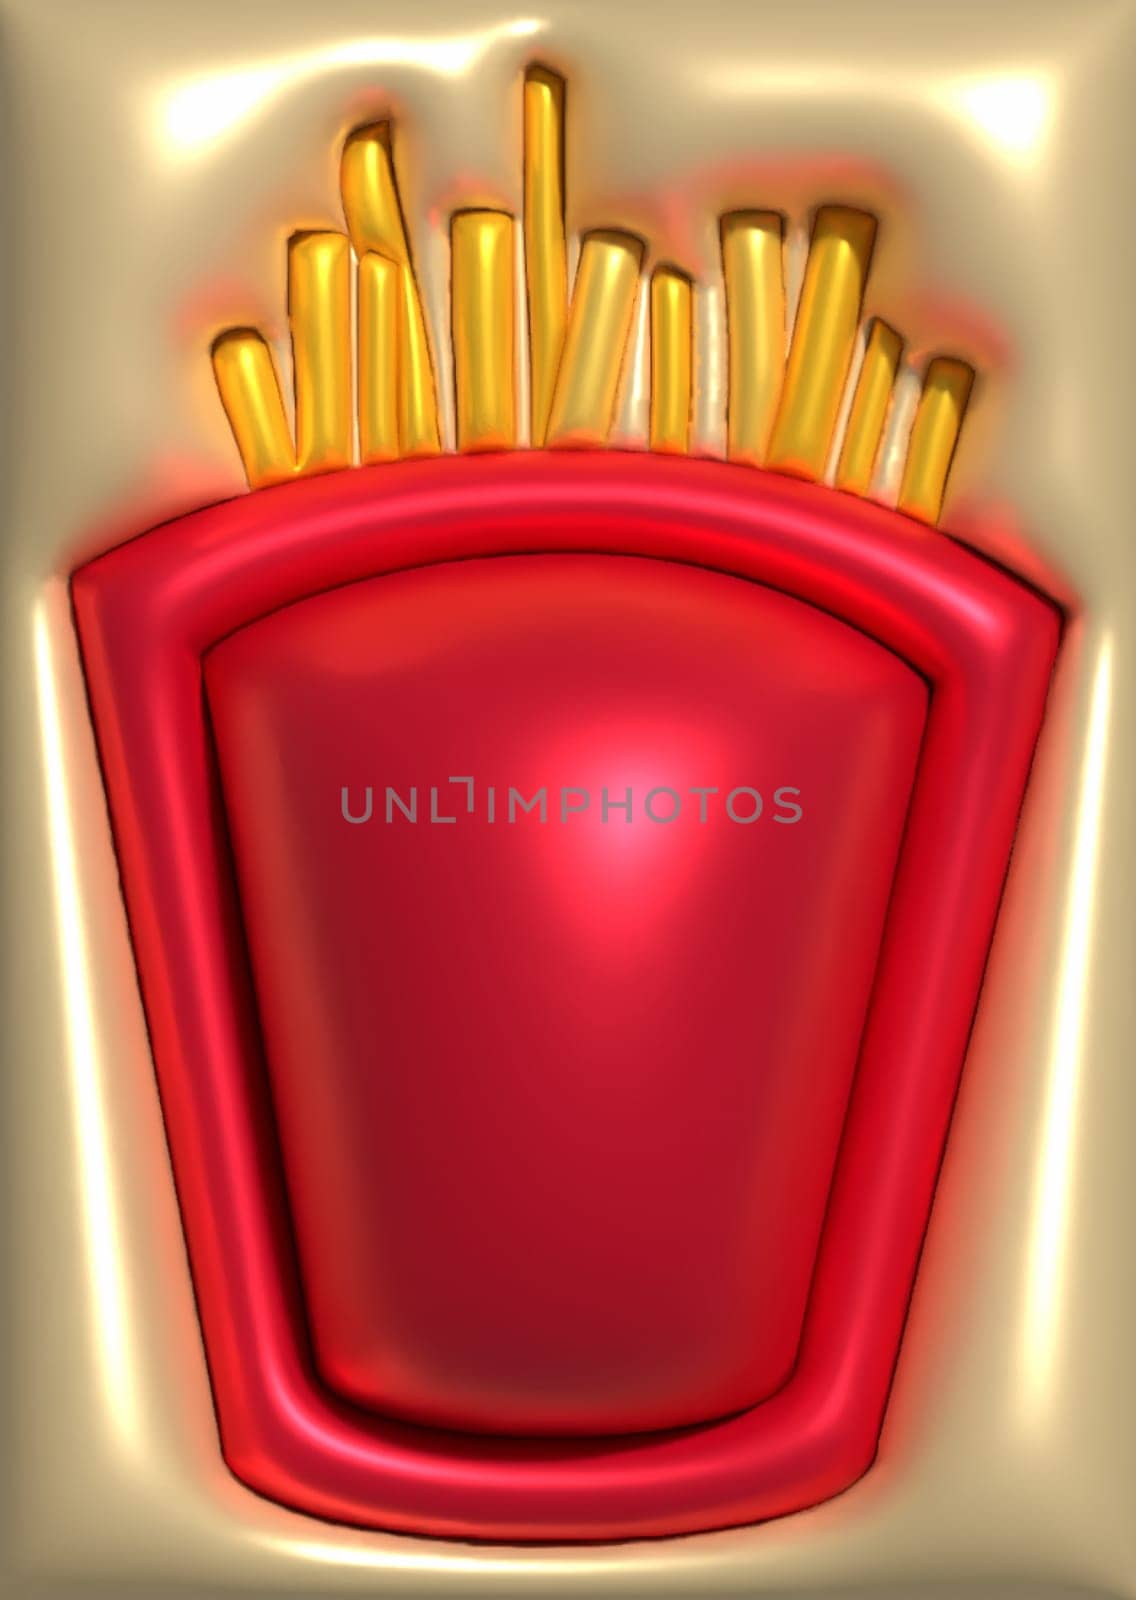 French fries in a red cup, 3D rendering illustration by ndanko